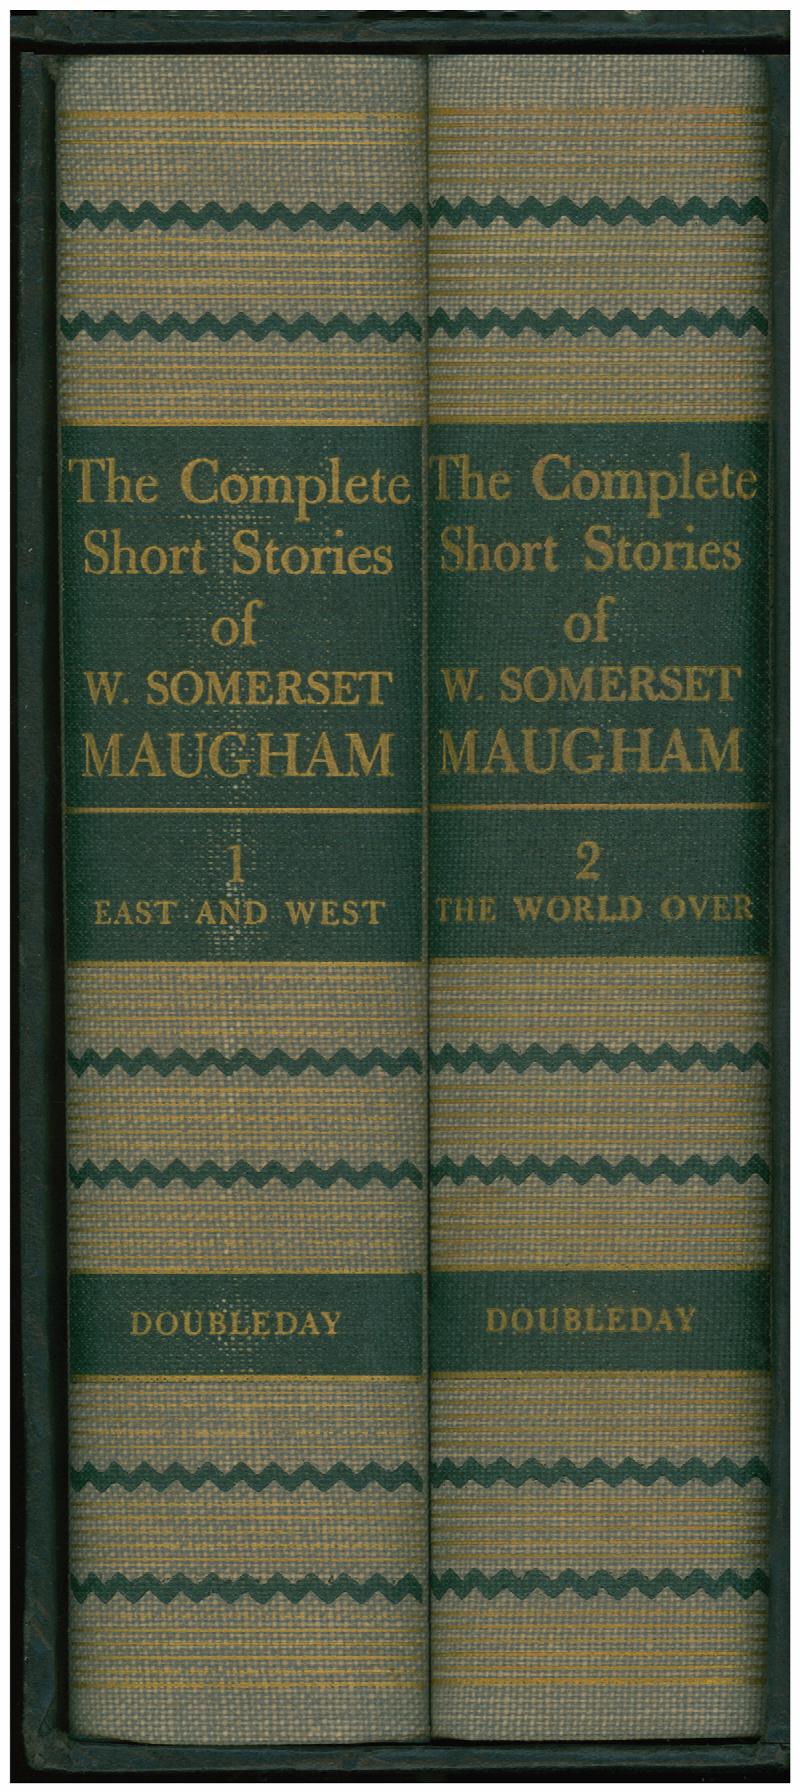 Image for The Complete Short Stories of W. Somerset Maugham (2 Volumes in slipcase)